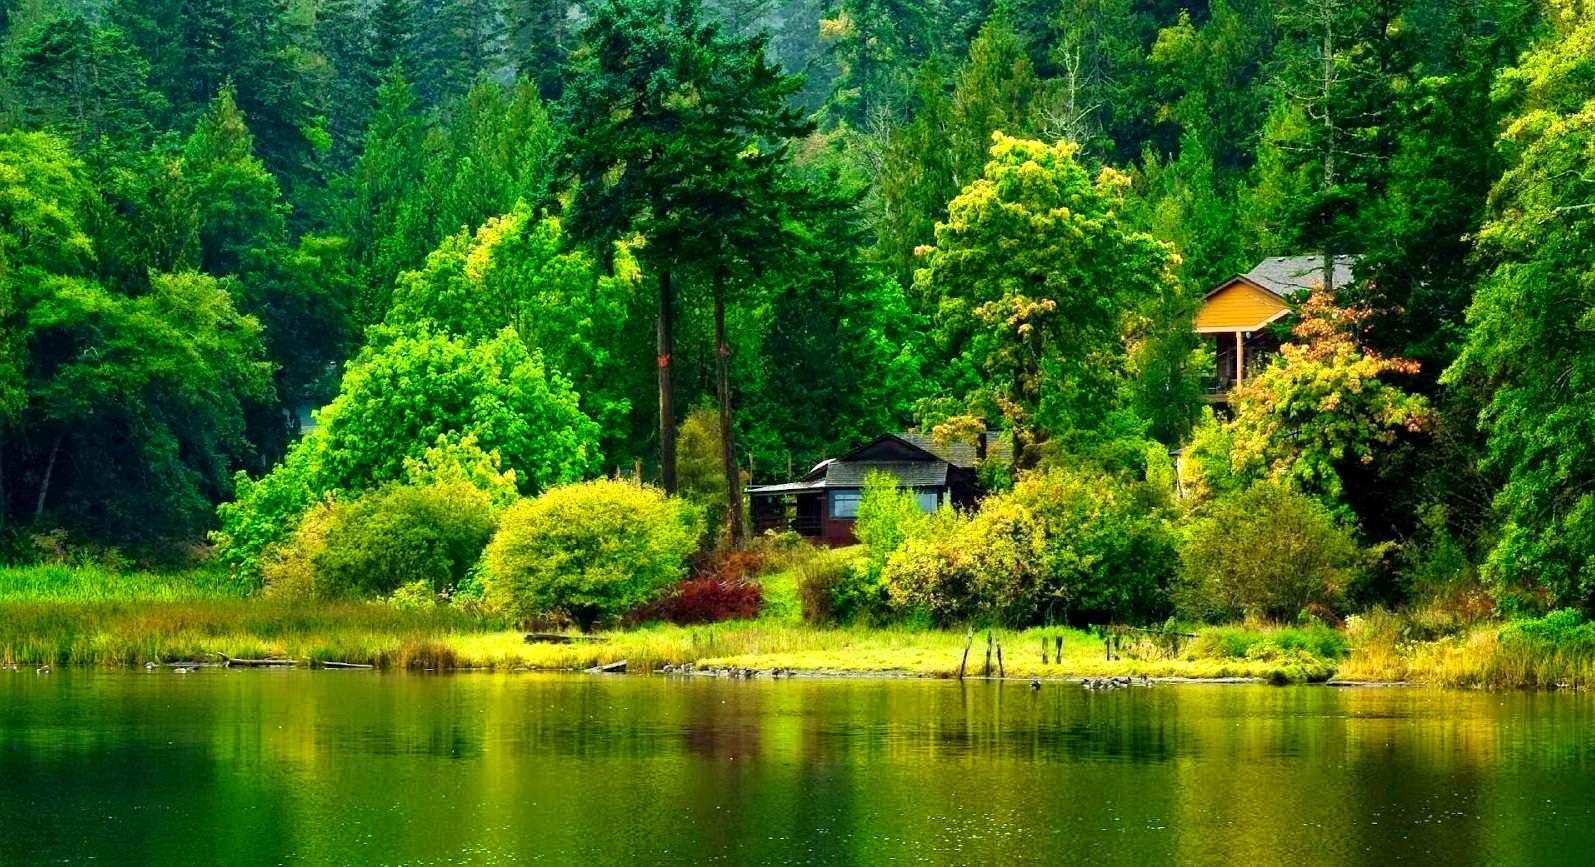 Lakes: Lake Greenery Serenity Tranquility Forest Calm Cottages